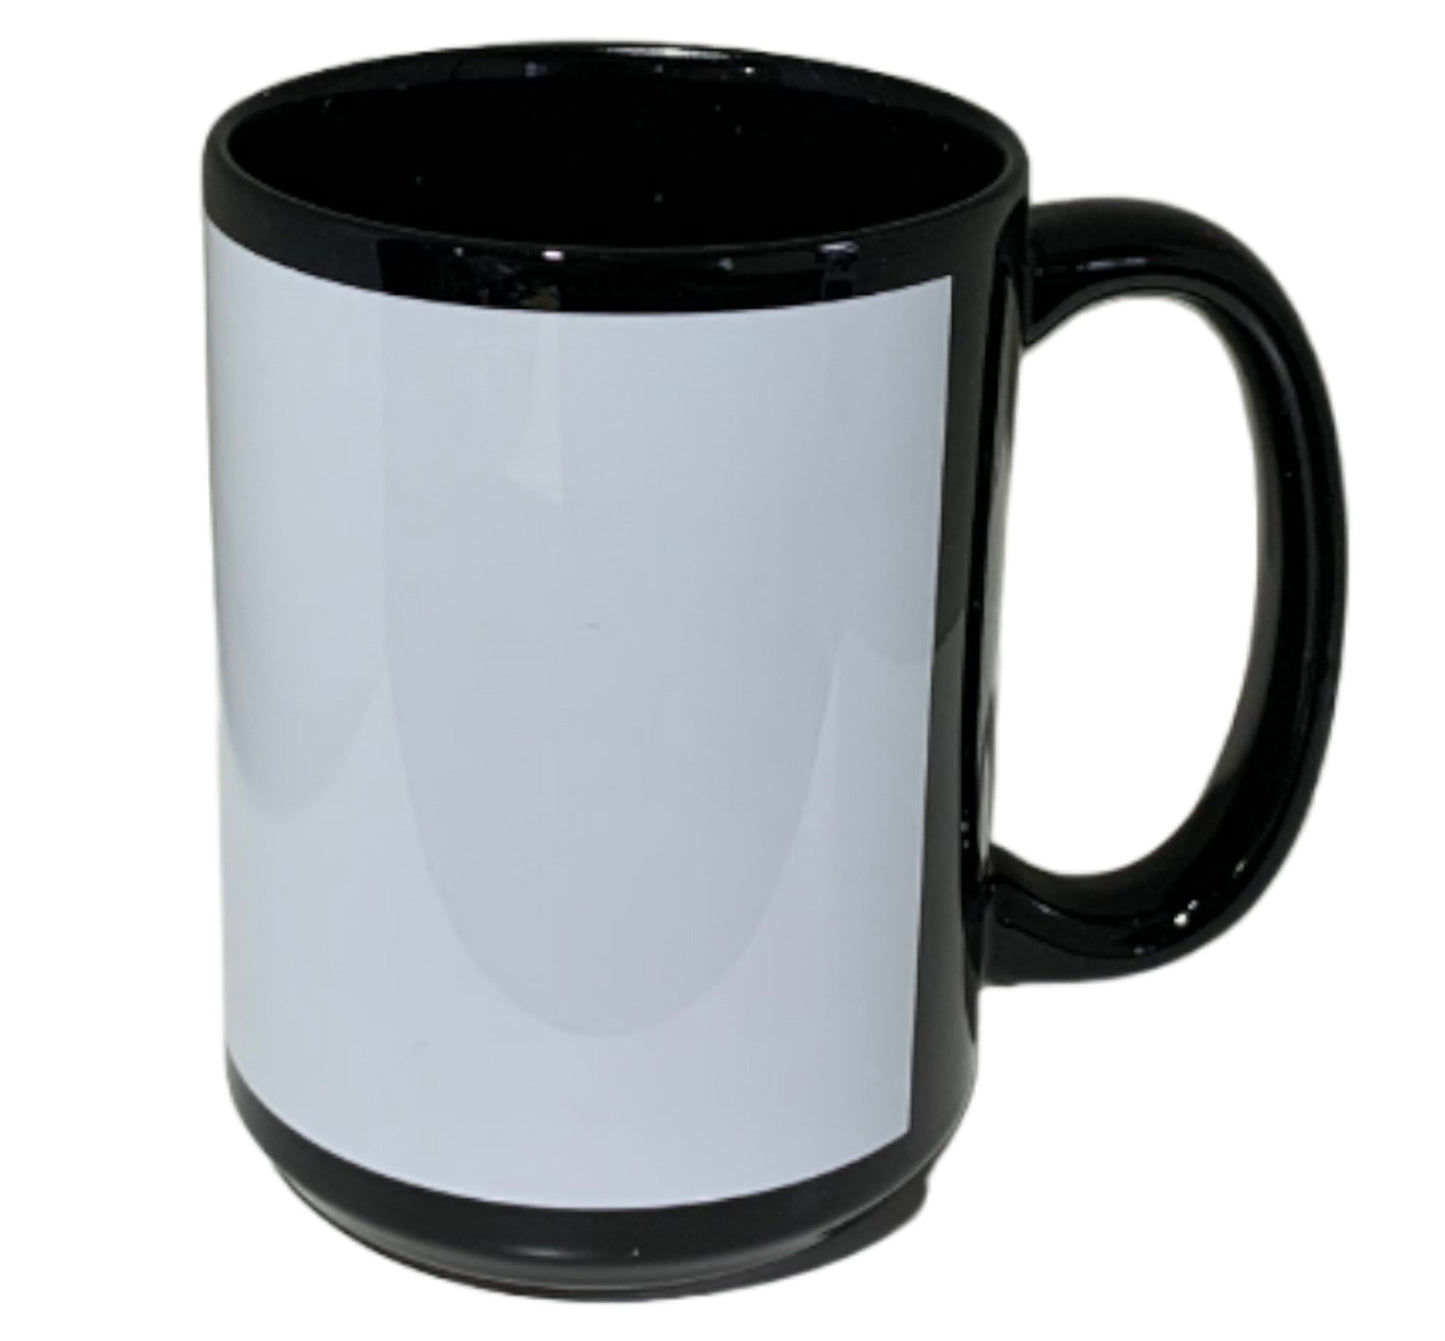 6 Pack -15 once black mugs with white strip with reinforced foam box packaging